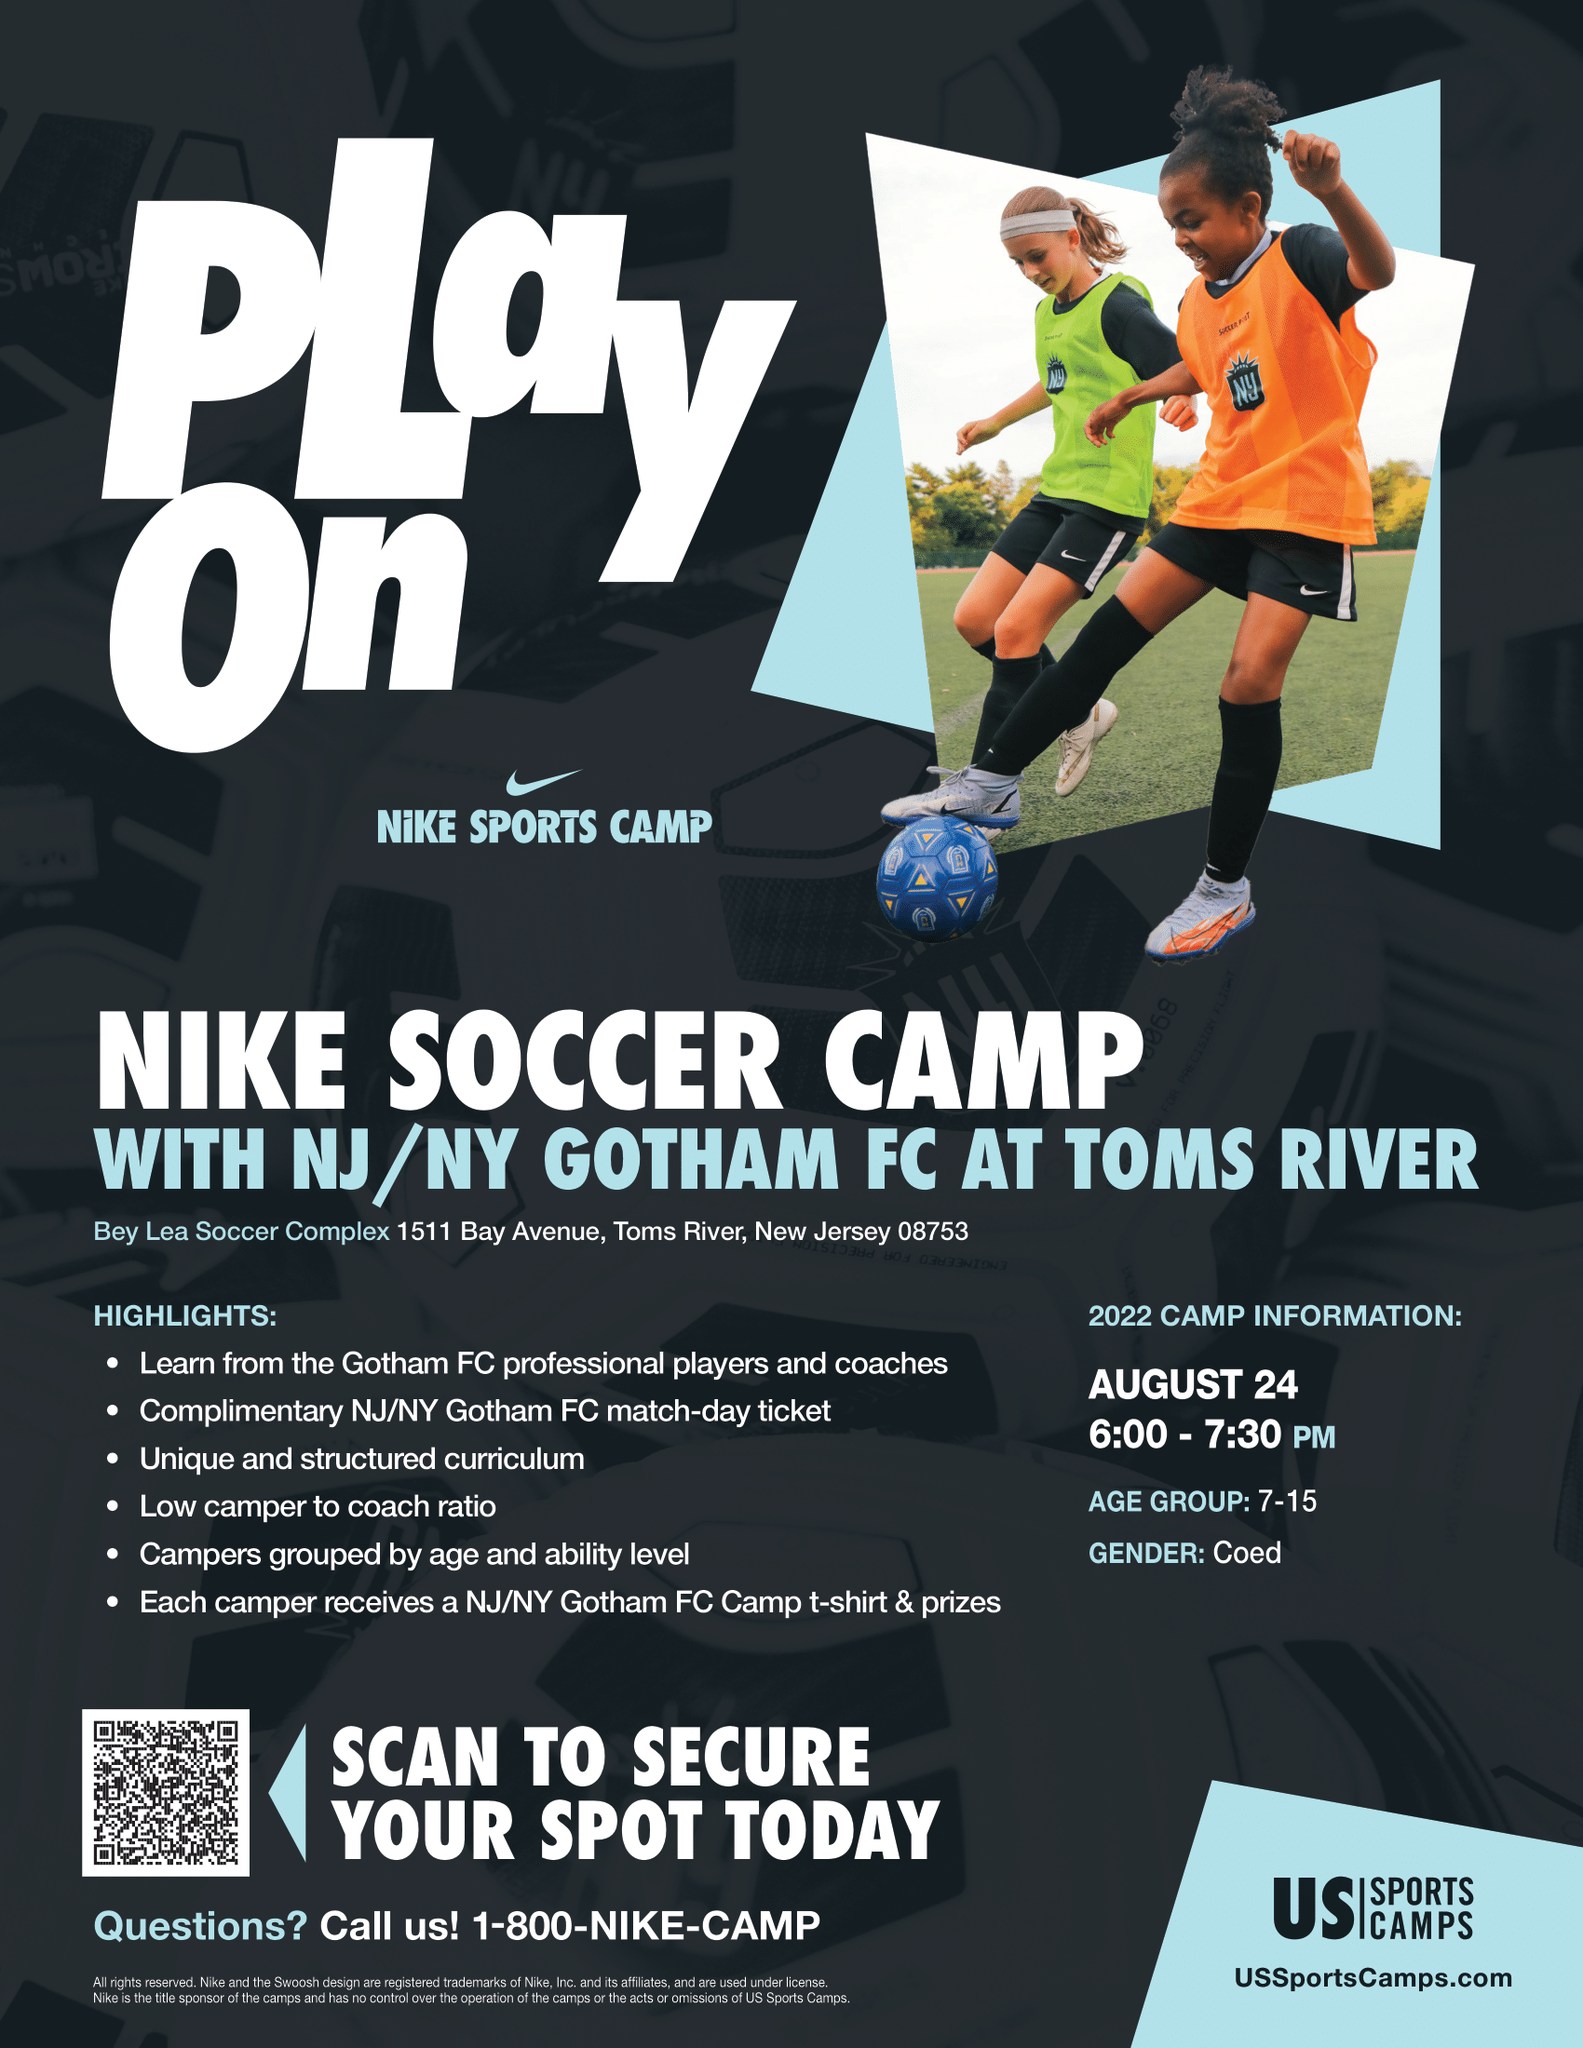 NIKE SOCCER CAMP WITH NJ/NY GOTHAM FC - TOMS RIVER